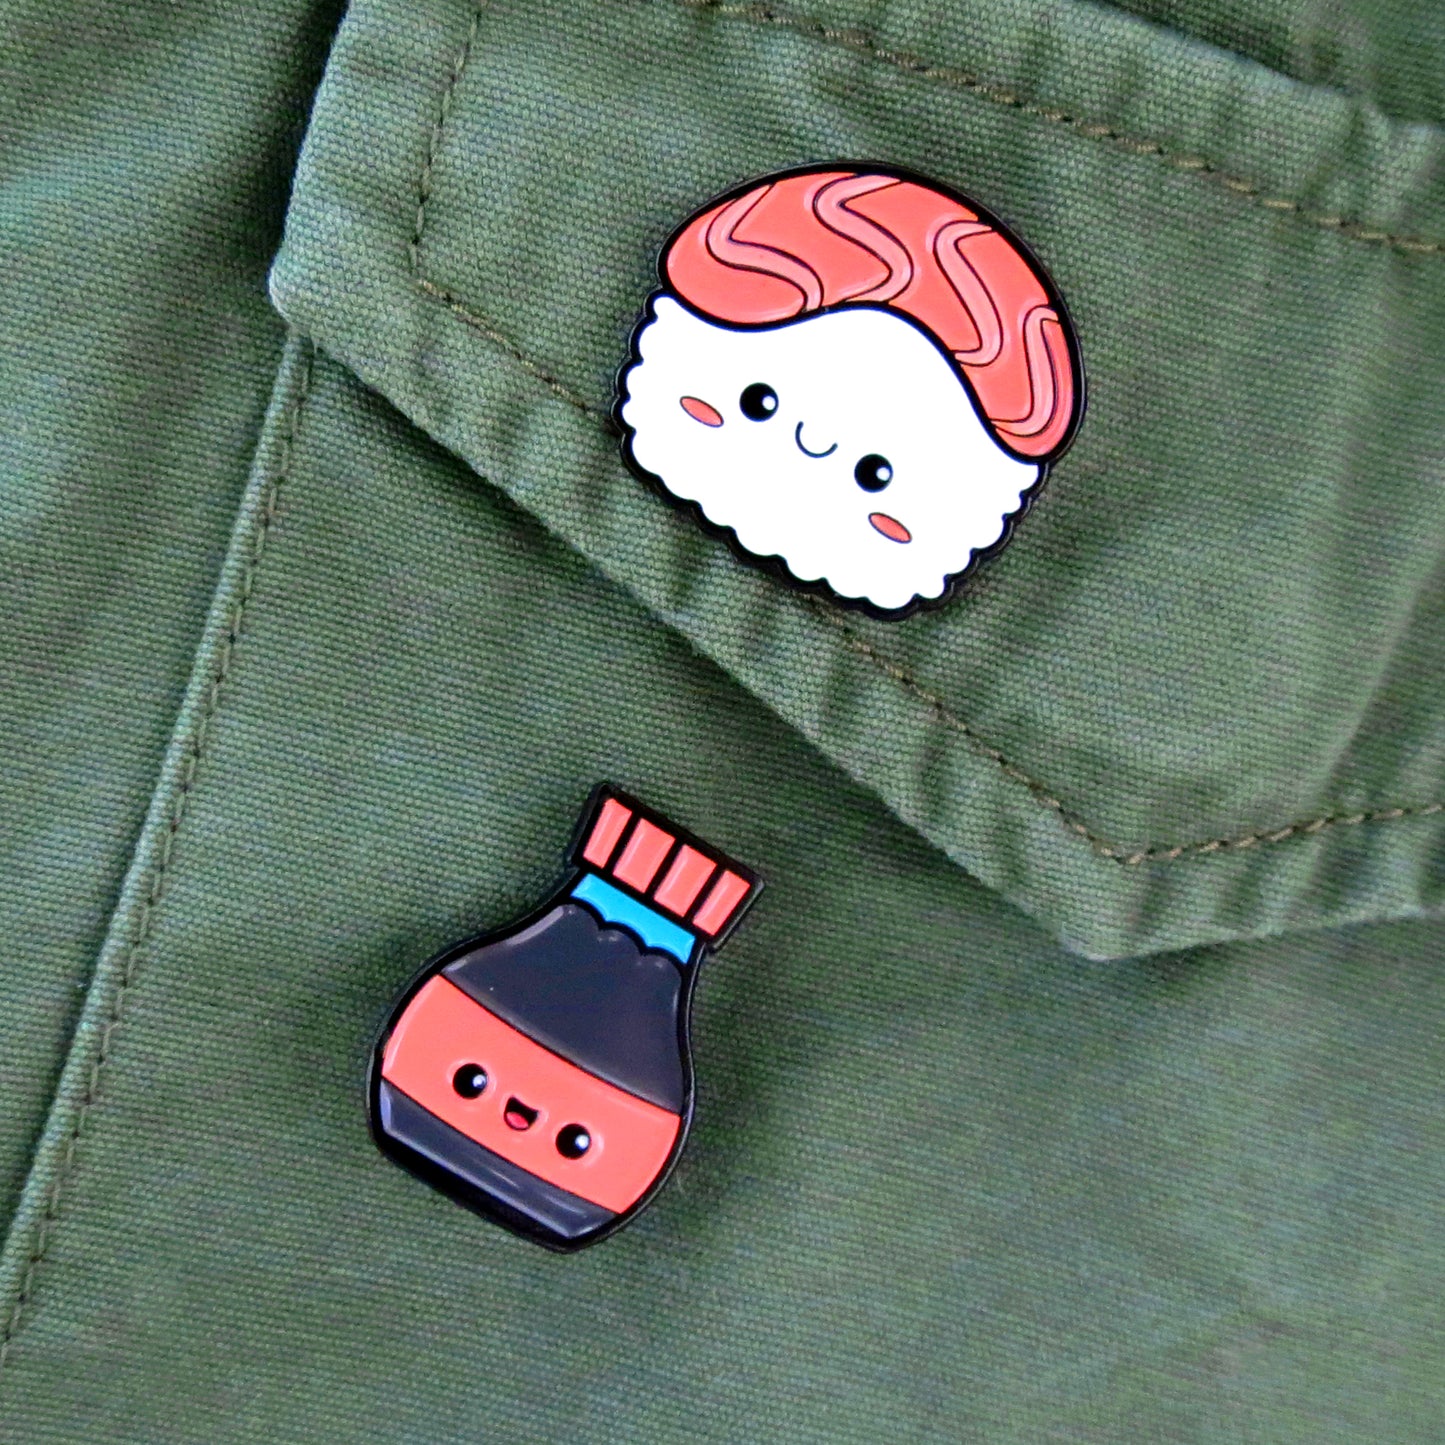 Sushi and Soy Sauce enamel pins on olive green canvas jacket pocket